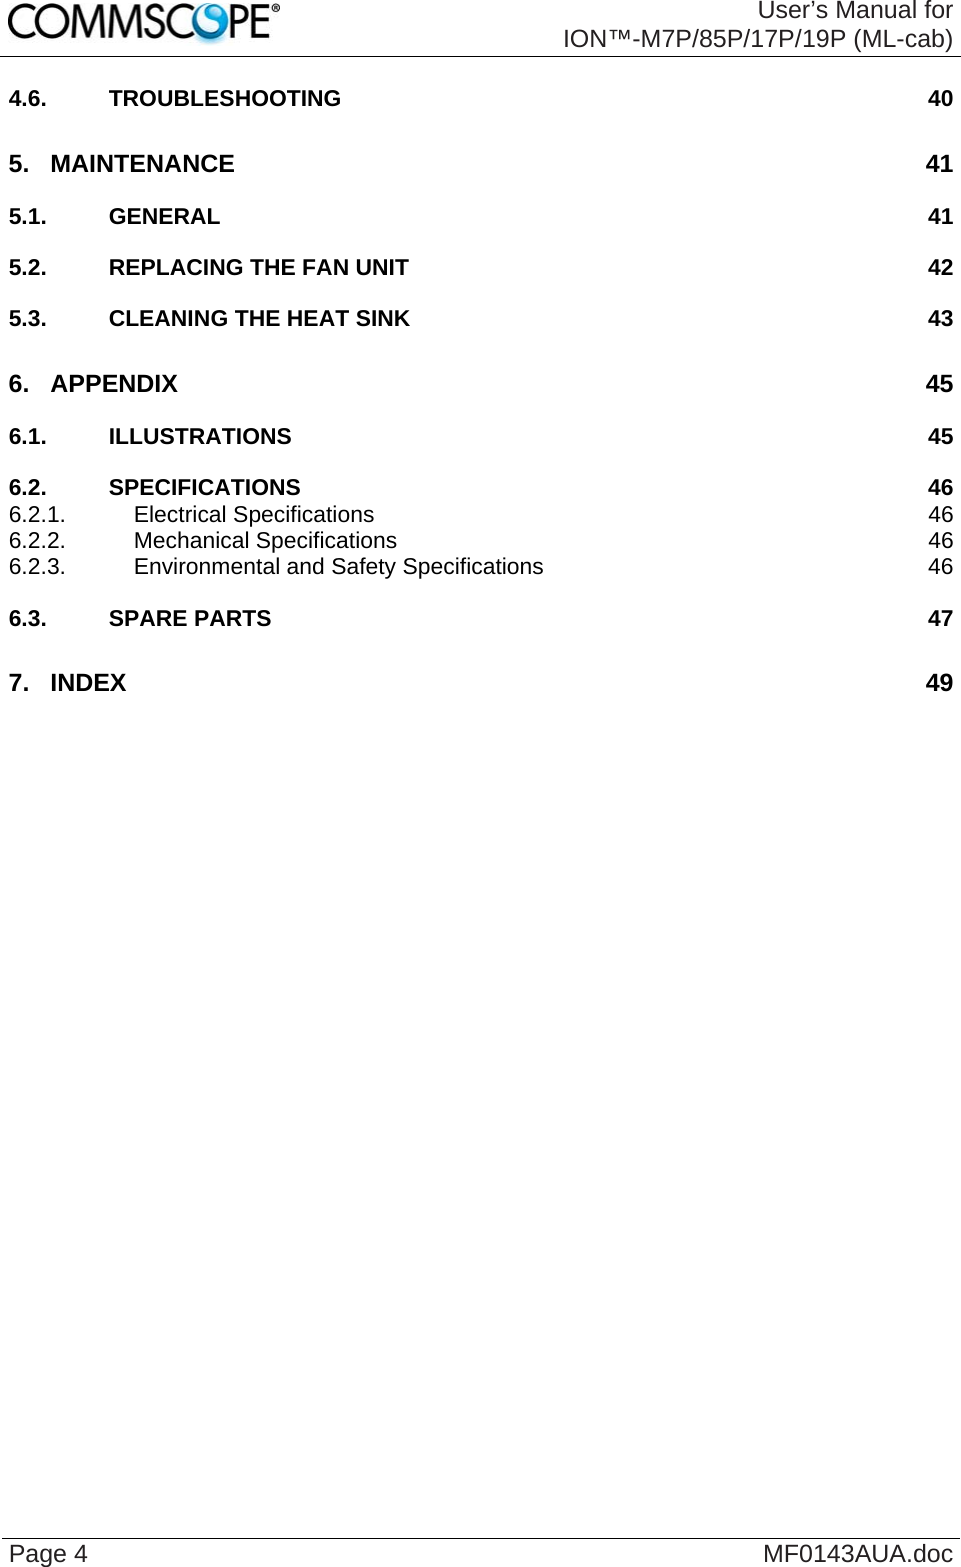  User’s Manual for ION™-M7P/85P/17P/19P (ML-cab) Page 4  MF0143AUA.doc 4.6. TROUBLESHOOTING 40 5. MAINTENANCE 41 5.1. GENERAL 41 5.2. REPLACING THE FAN UNIT 42 5.3. CLEANING THE HEAT SINK 43 6. APPENDIX 45 6.1. ILLUSTRATIONS 45 6.2. SPECIFICATIONS 46 6.2.1. Electrical Specifications 46 6.2.2. Mechanical Specifications 46 6.2.3. Environmental and Safety Specifications 46 6.3. SPARE PARTS 47 7. INDEX 49  